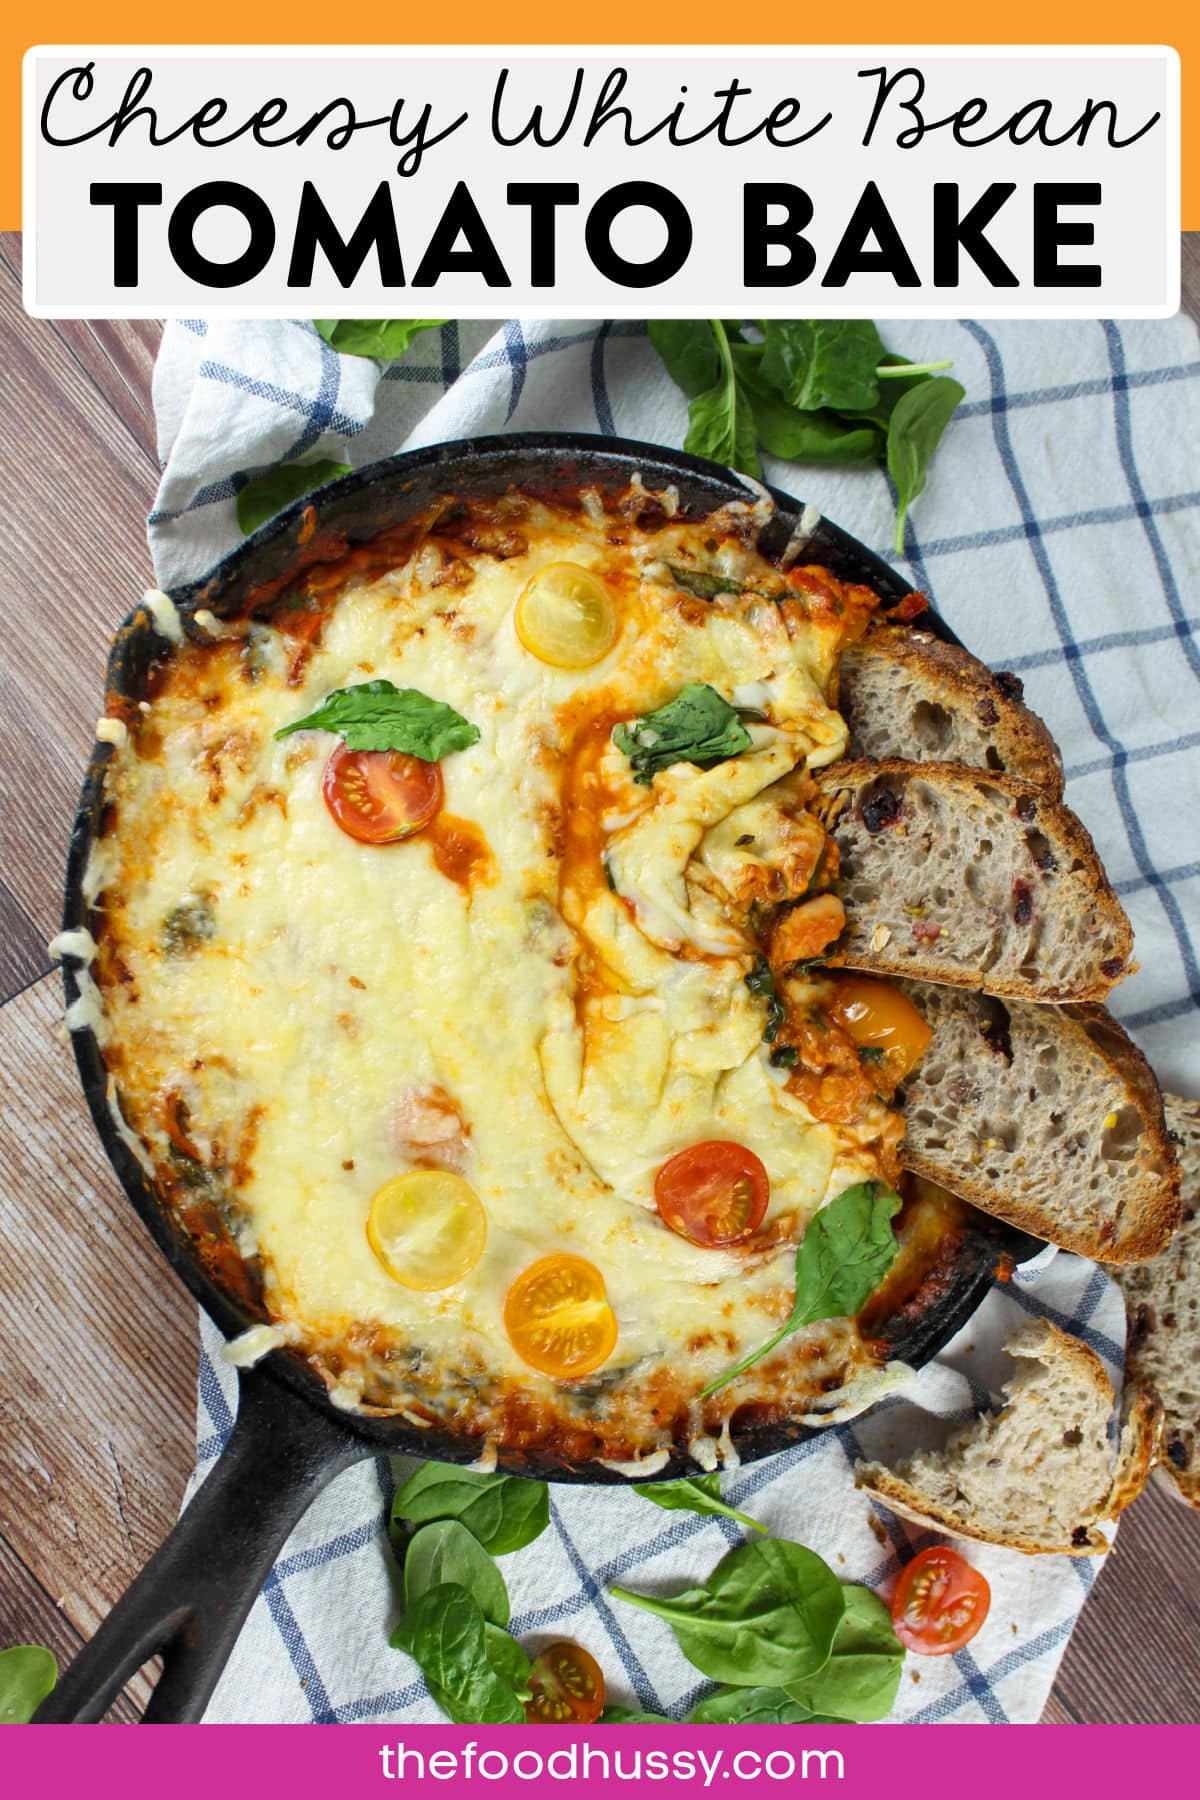 Cheesy White Bean Tomato Bake is a great appetizer or vegetarian one-pan dinner that the whole family will enjoy! Dip your favorite crusty bread into this cheesy dip chock full of warm white beans, fresh tomatoes and a great garlicky aroma! via @foodhussy